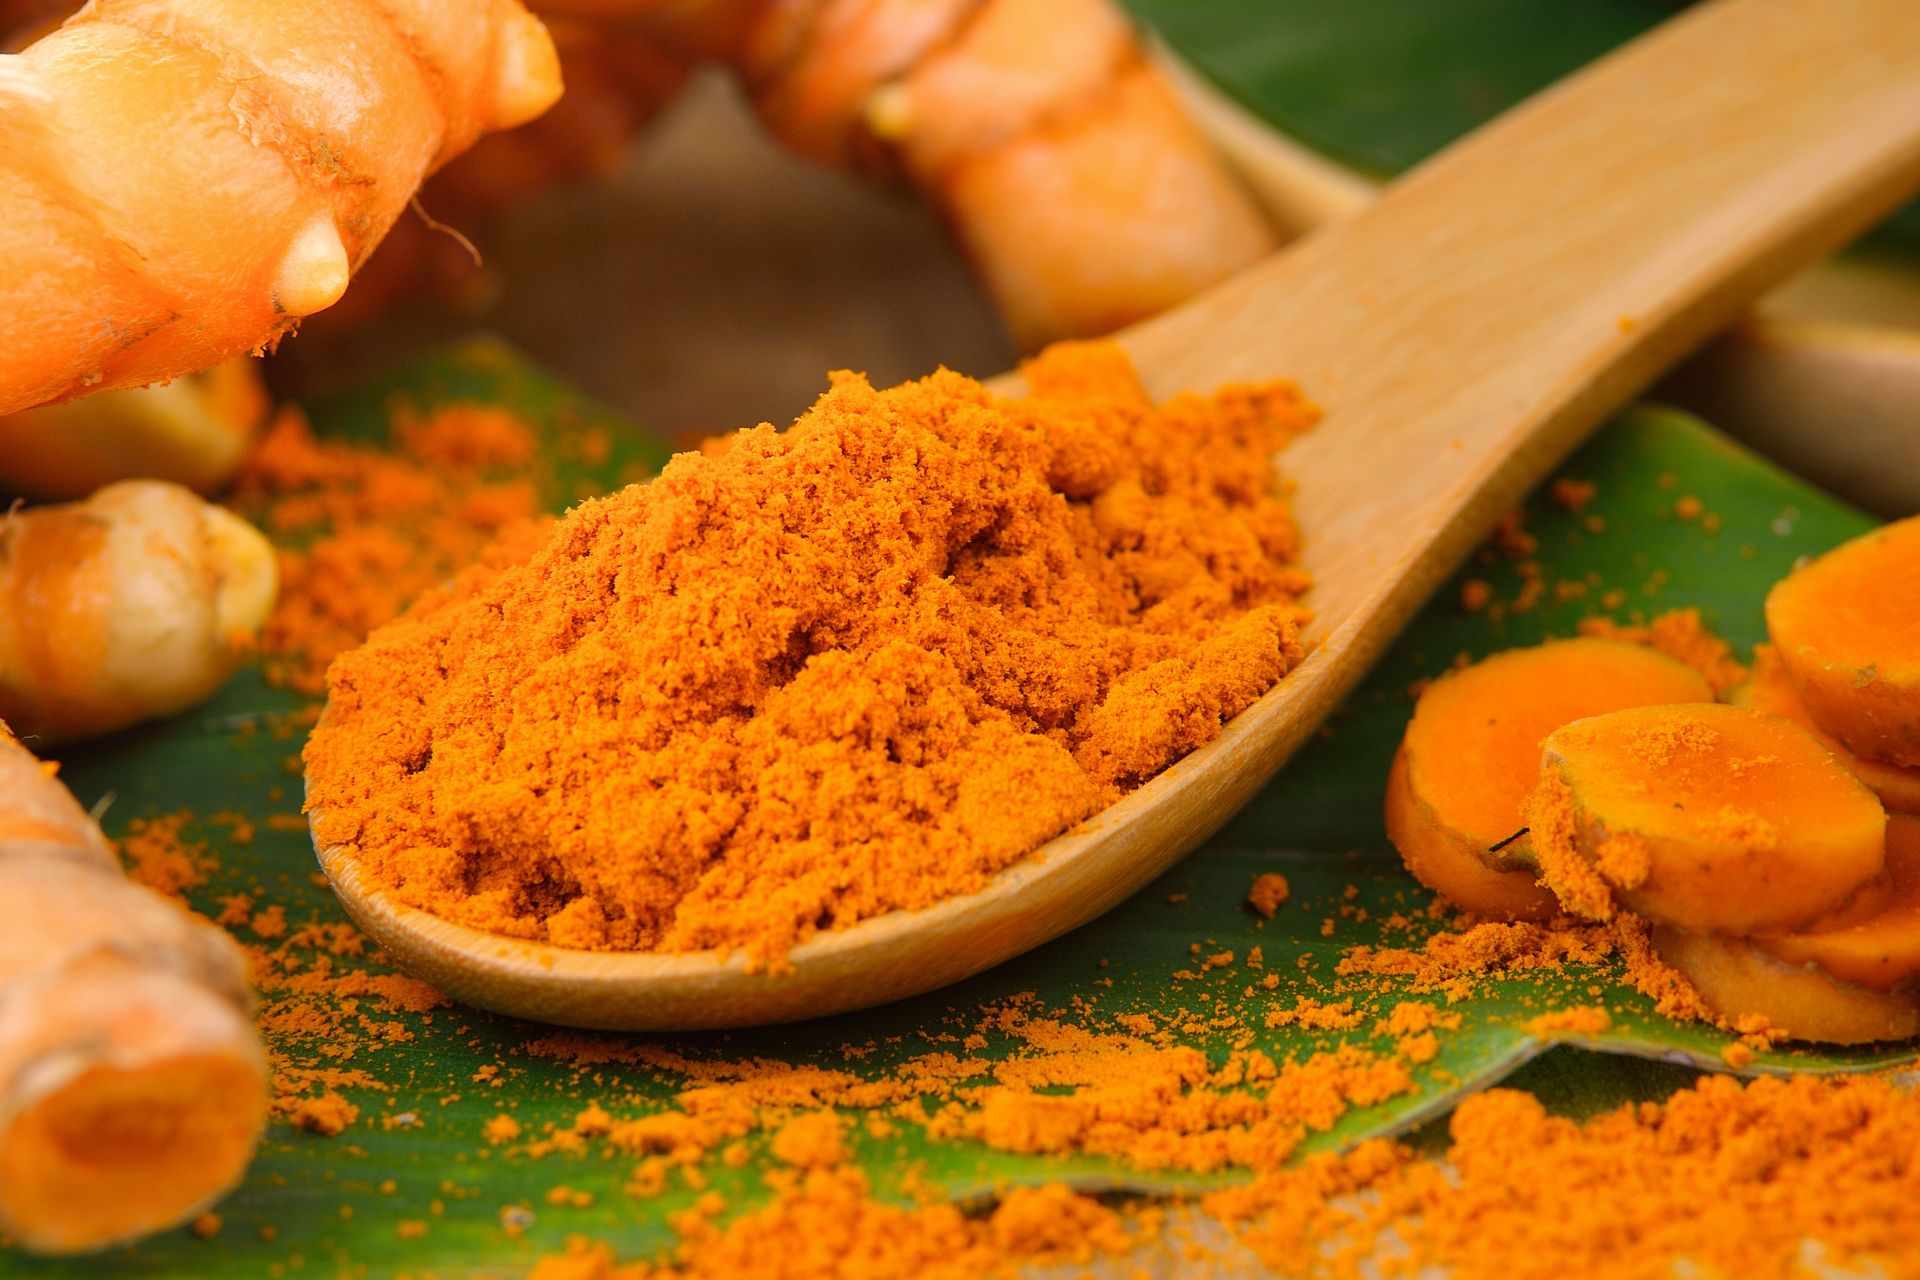 Turmeric and Kratom: Why They Make a Great Combination